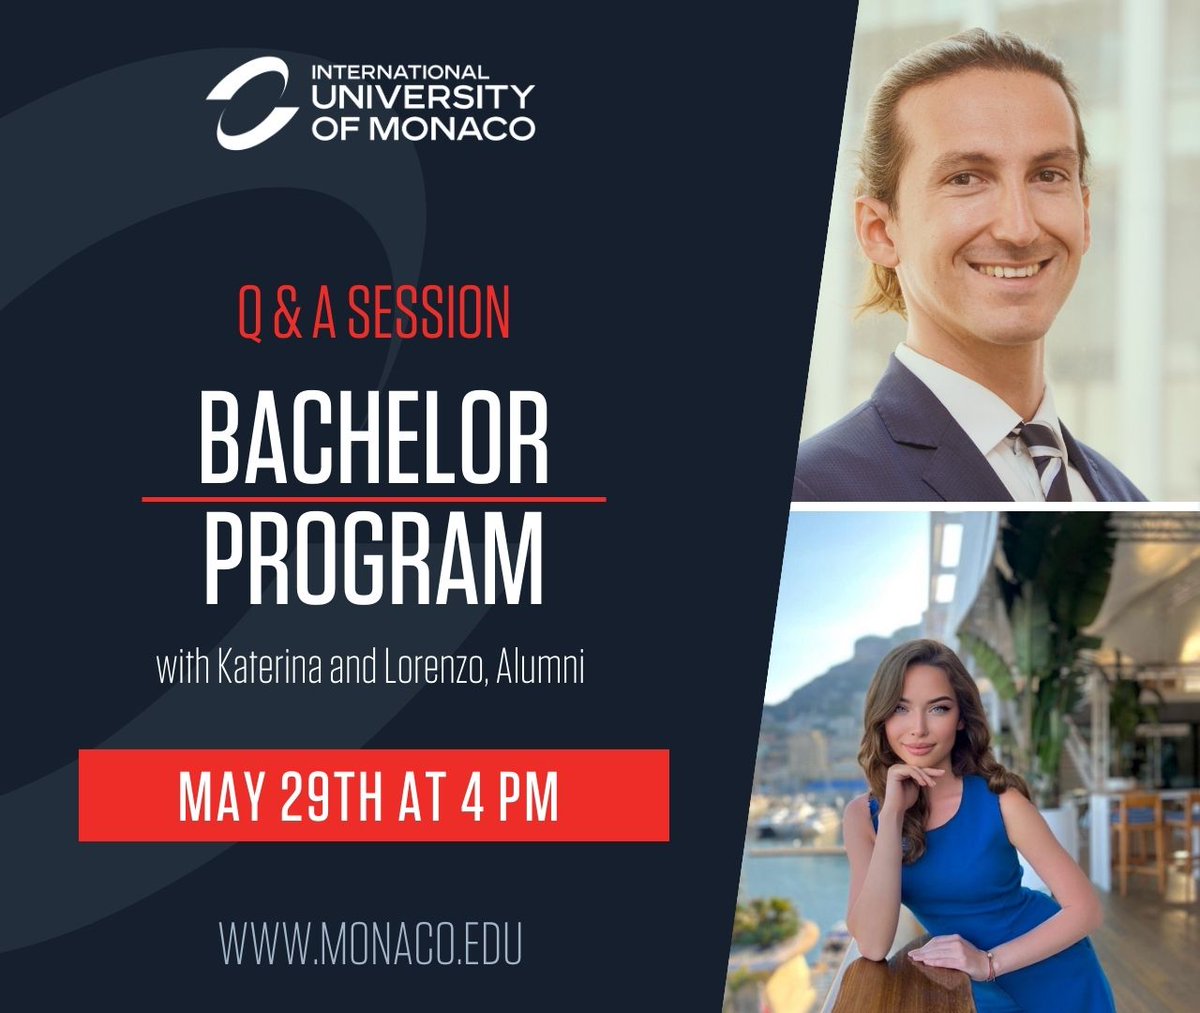 [Meet the IUM #BACHELOR Alumni: Live Q&A and Open Day]
👉 The IUM Journey: Hear it from the Insiders 

Join #IUM's interactive Online Open Day on May 29 at 4 pm. and get a sneak peek at your future success!

▶ monaco.edu/inseecu/webinar
#Monaco #InvestInYourself #prepareyourfuture